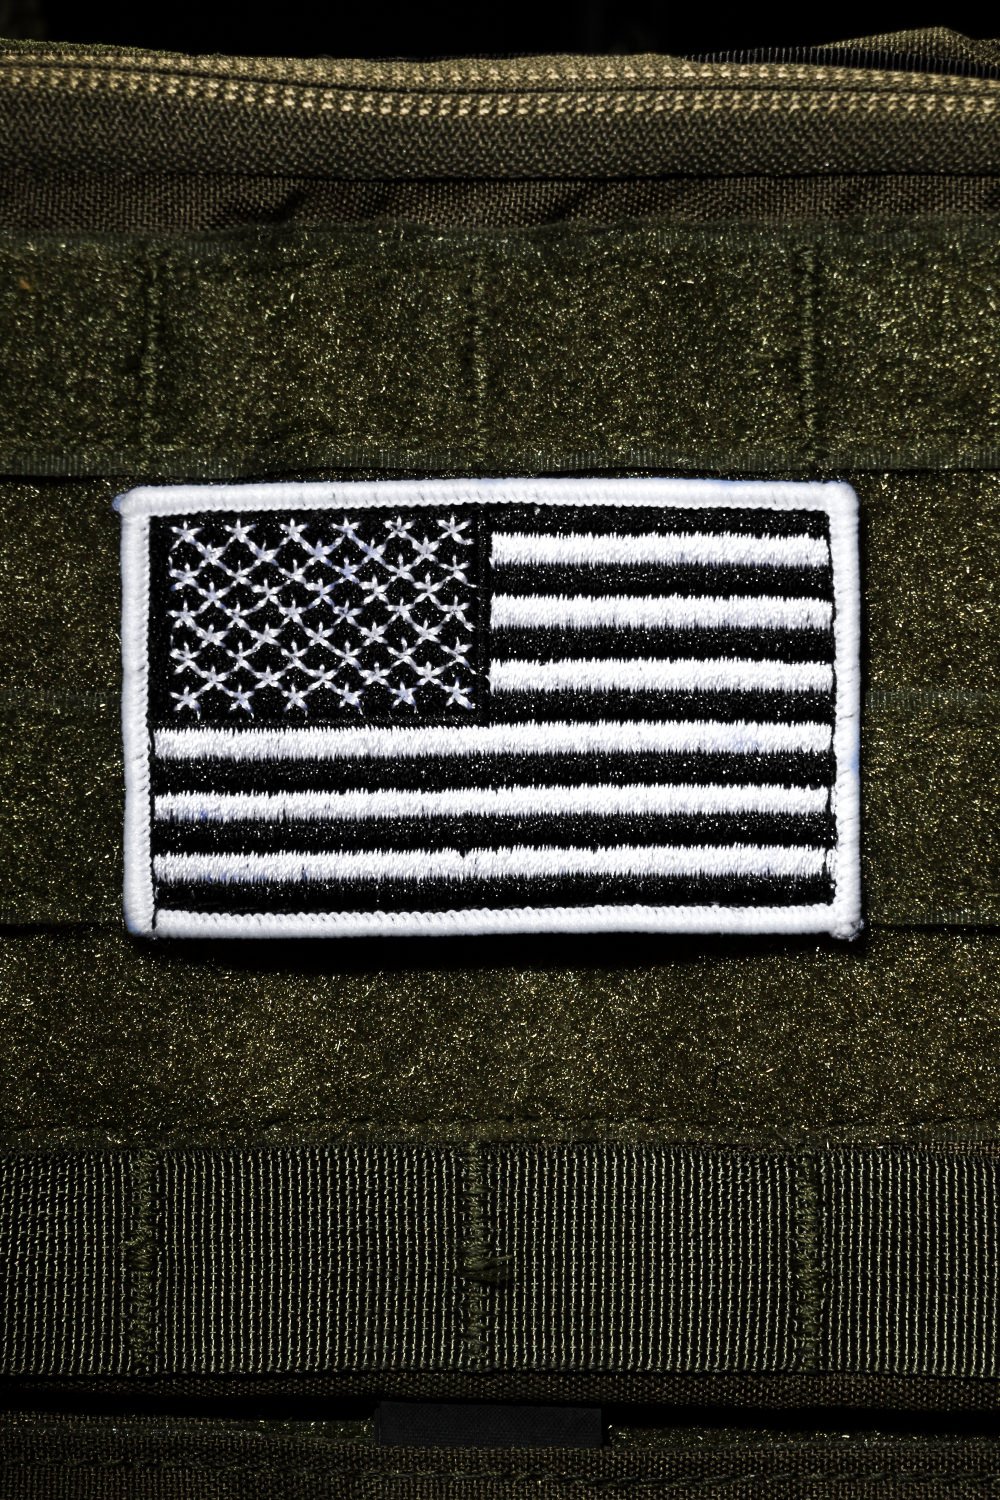 Small 3.5 X 1.9 BLACK and GRAY American Flag Iron on Patch 4952 G9 